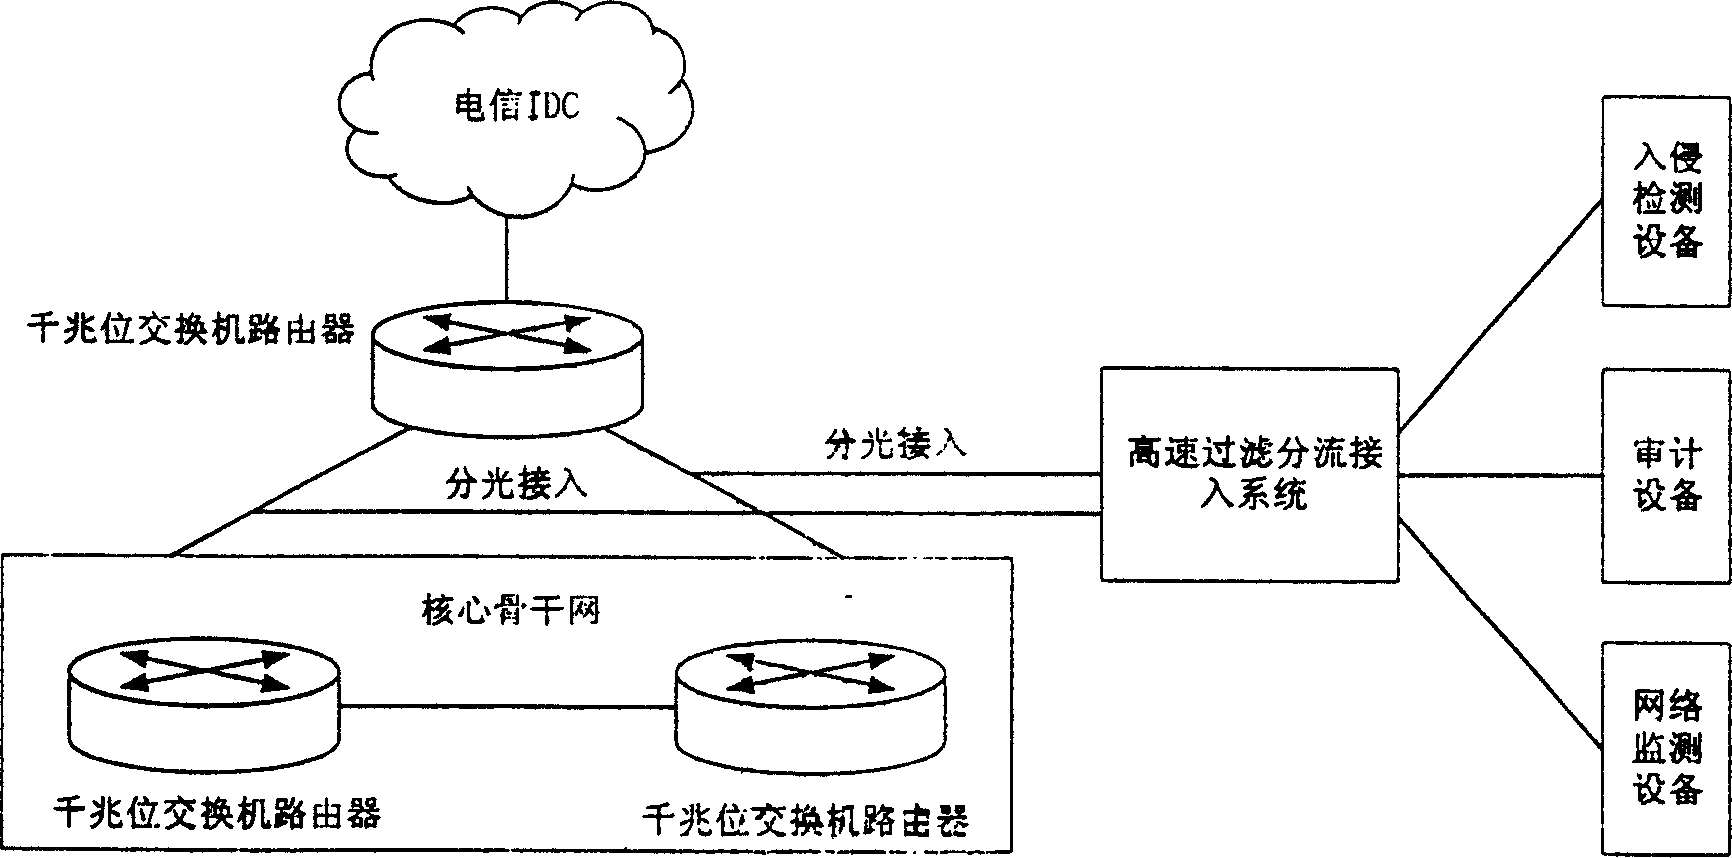 High speed filtering and stream dividing method for keeping connection features